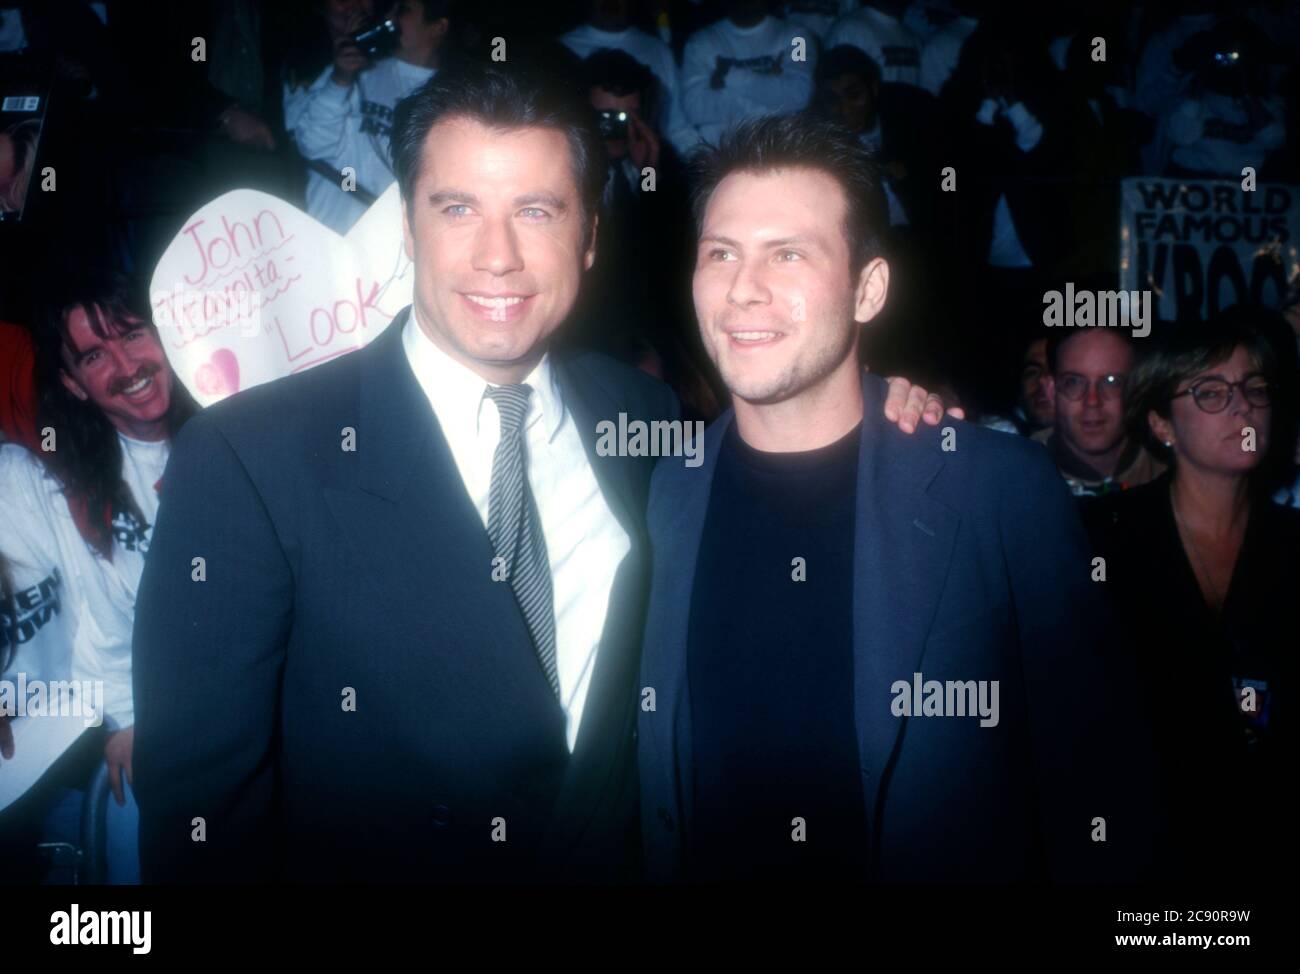 Westwood, California, USA 5th February 1996 Actor John Travolta and actor Christian Slater attend 20th Century Fox' 'Broken Arrow' Premiere on February 5, 1996 at Mann Village Theatre in Westwood, California, USA. Photo by Barry King/Alamy Stock Photo Stock Photo